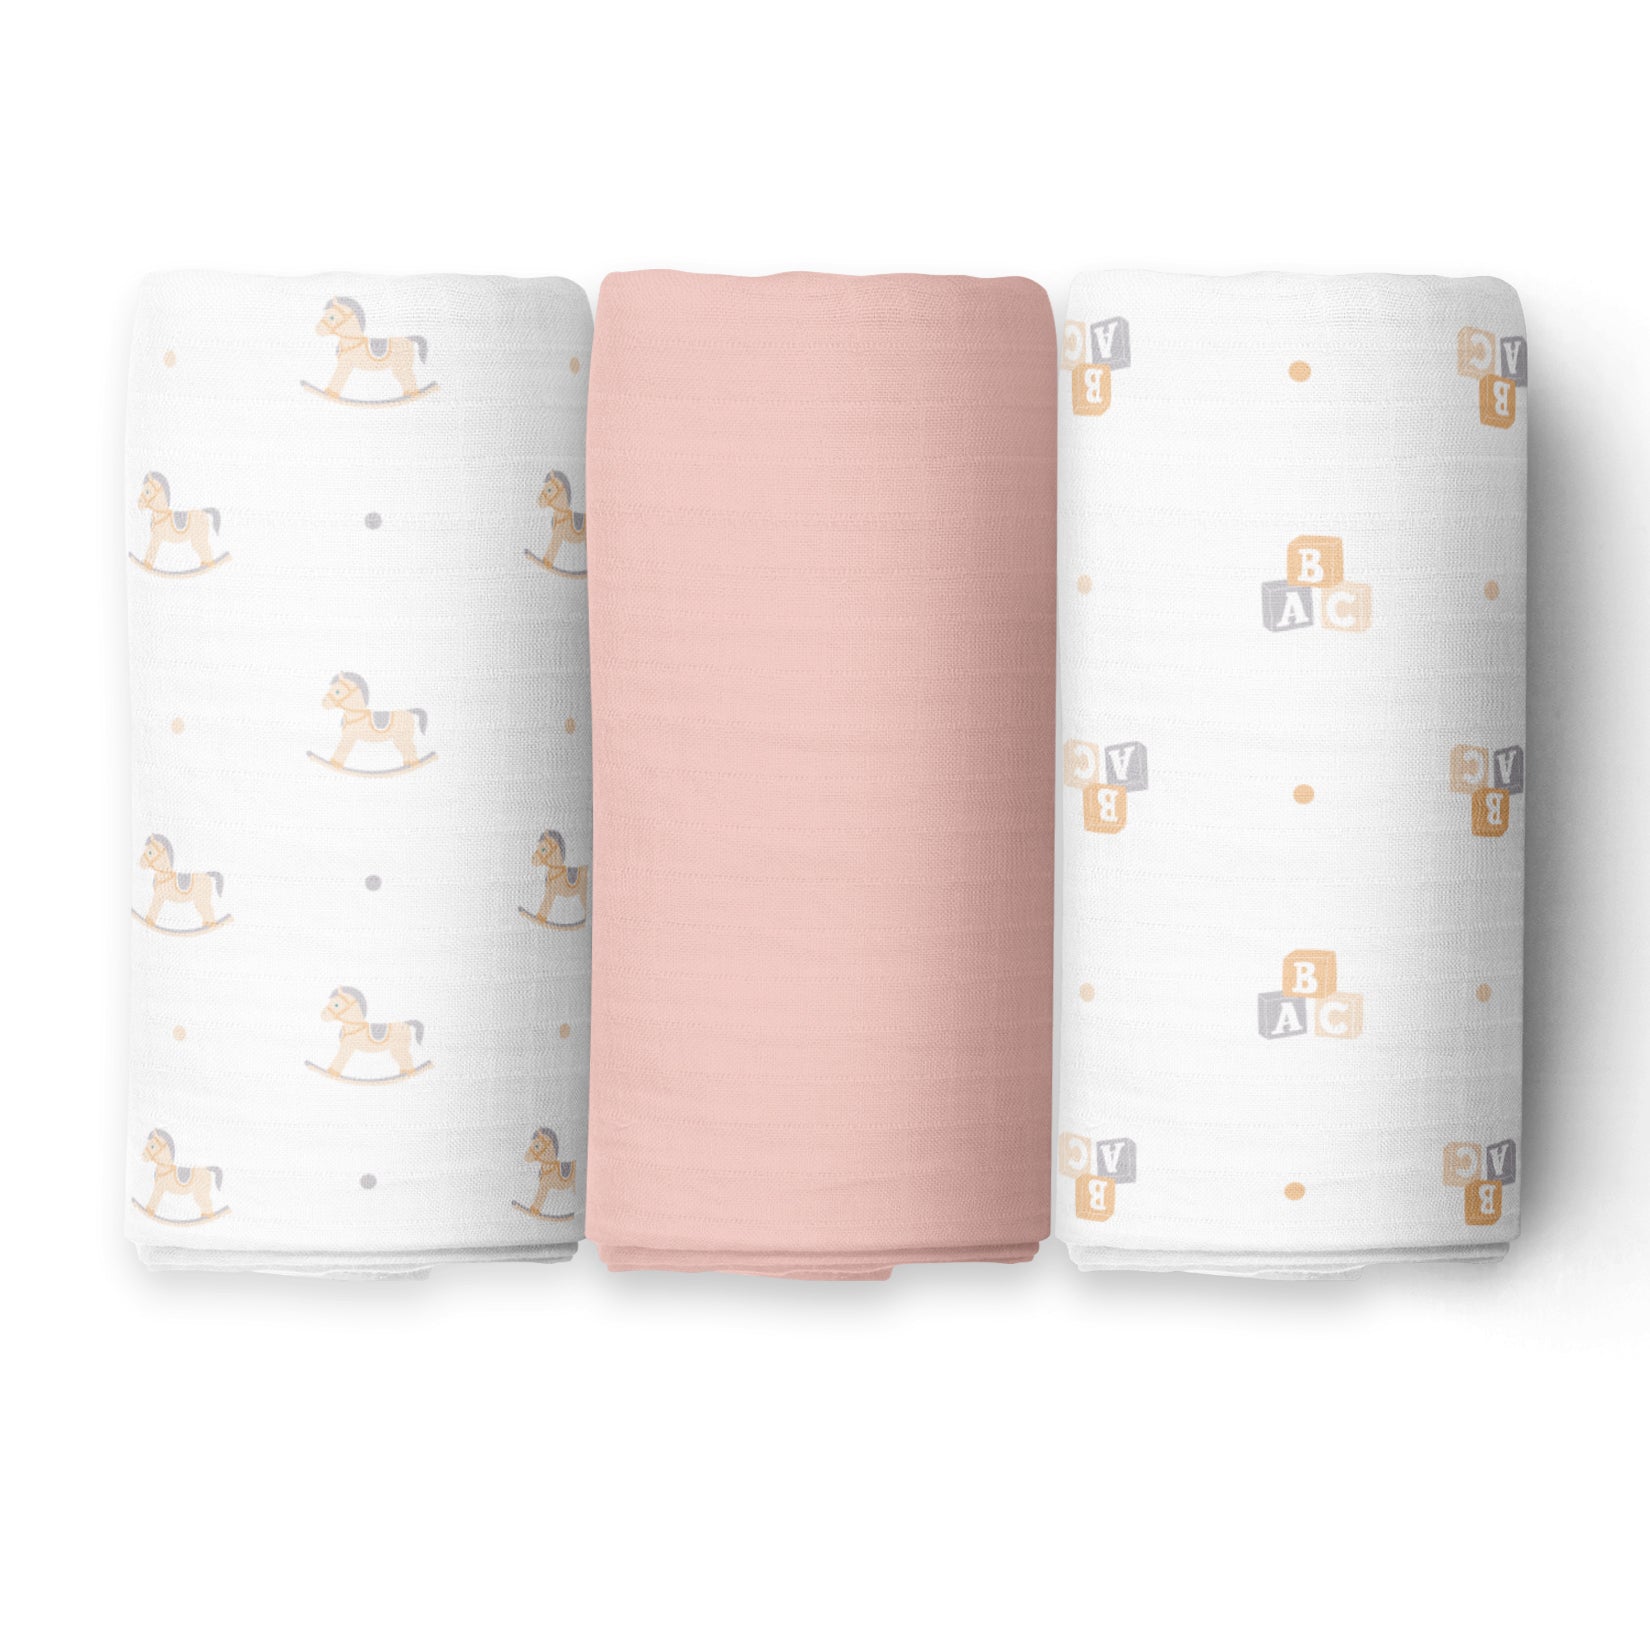 The White Cradle 100% Organic Cotton Baby Swaddle Wrap - Pink Bear 3 design